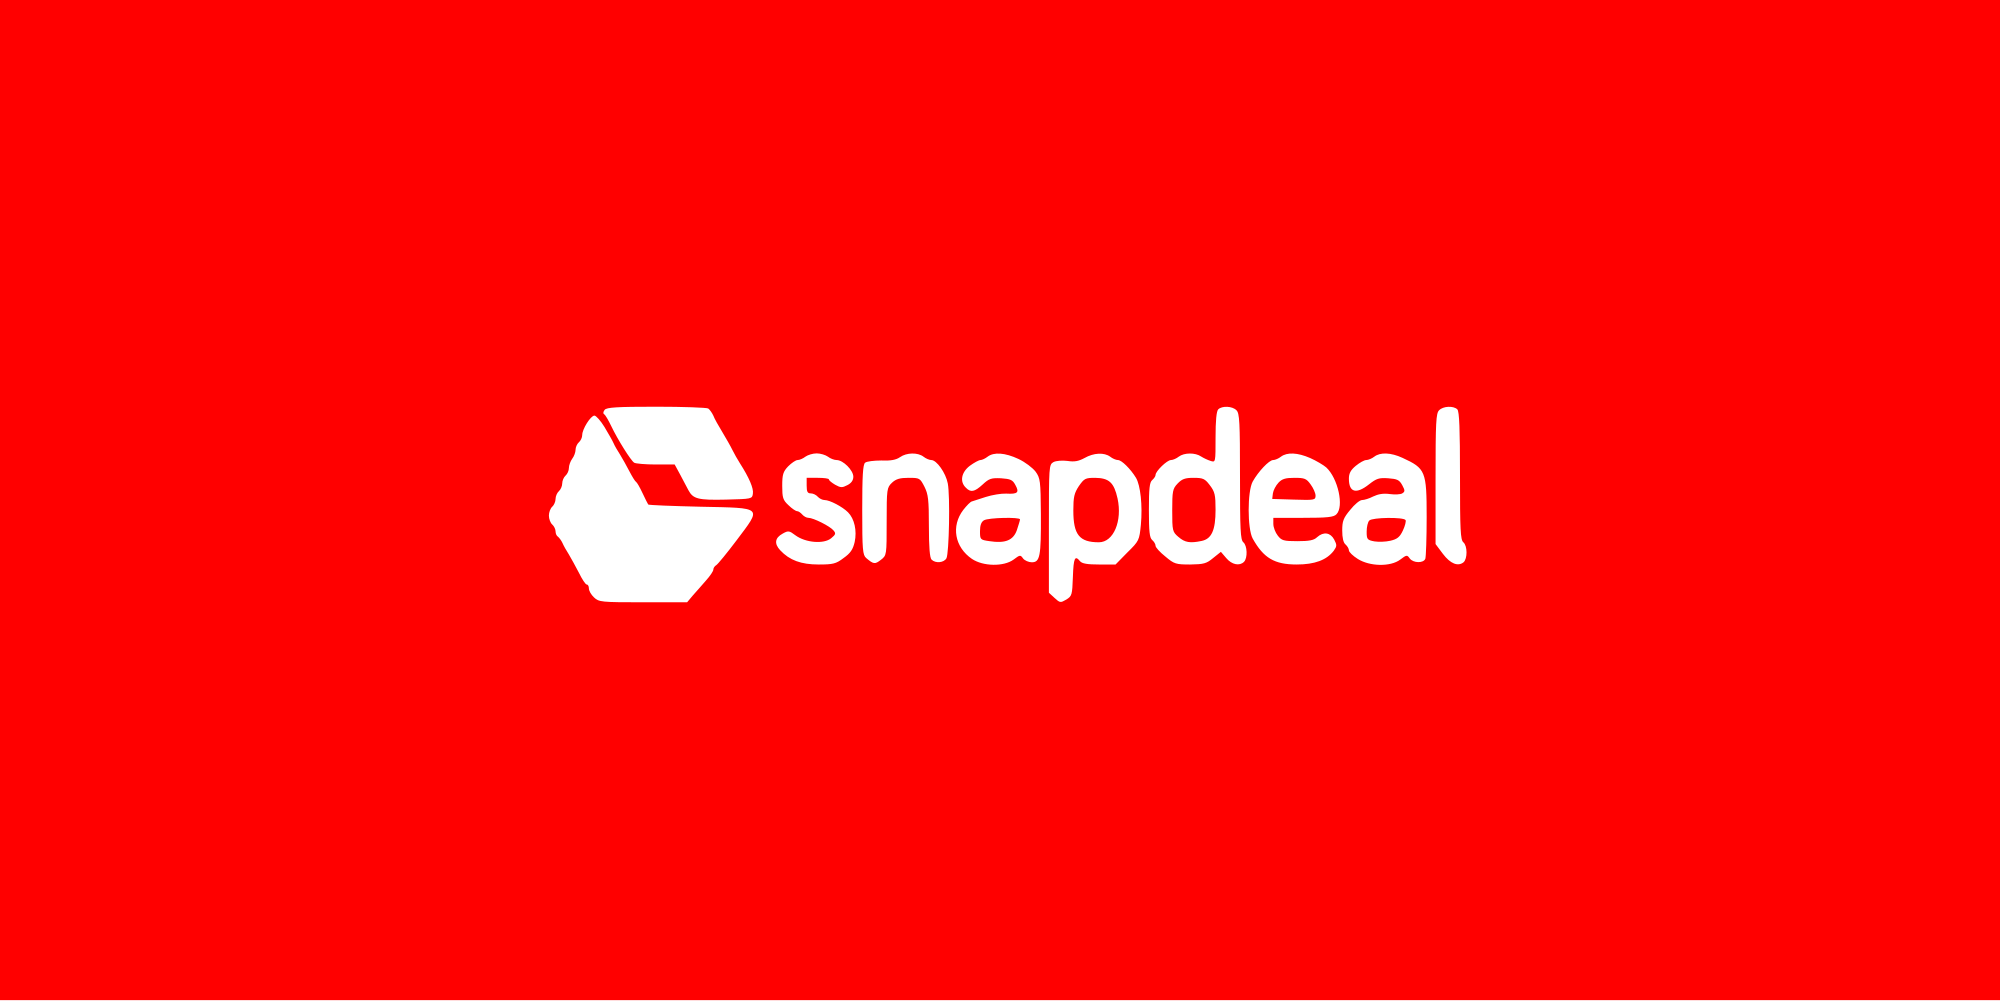 Snapdeal raises nearly Rs 3,2